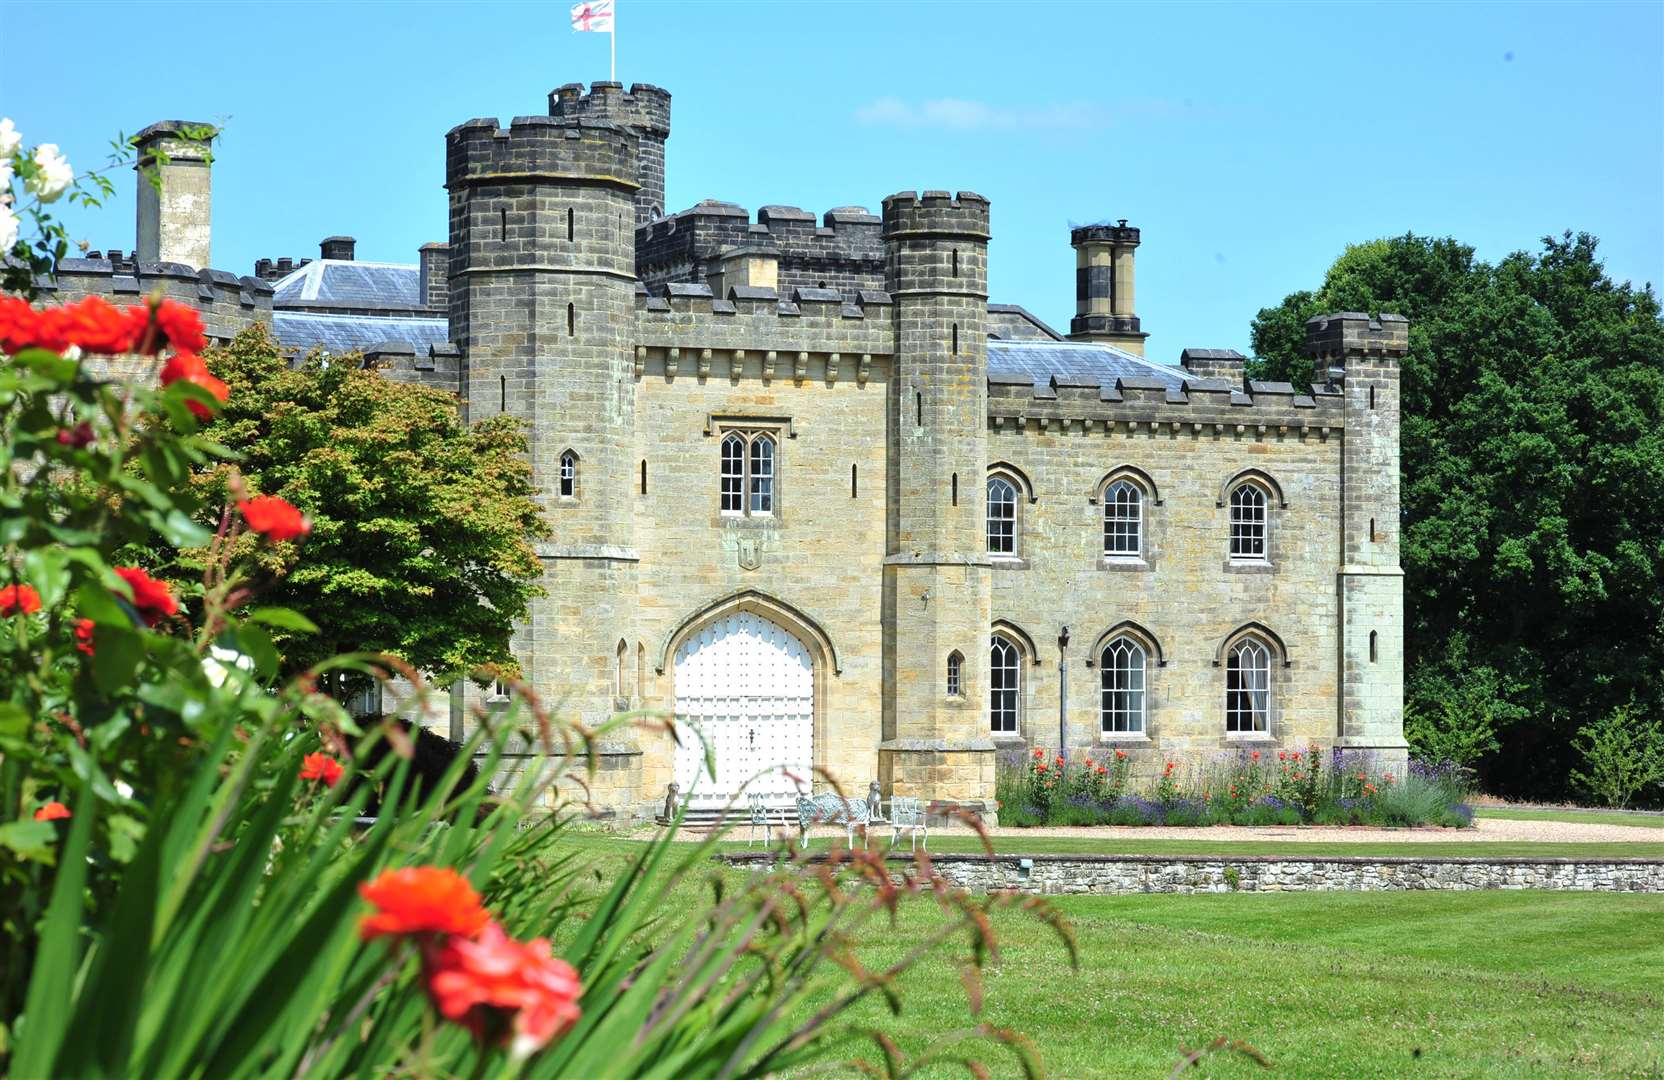 This weekend, Chiddingstone Castle will host a bustling vintage fair. Picture: Darryl Curcher Photography